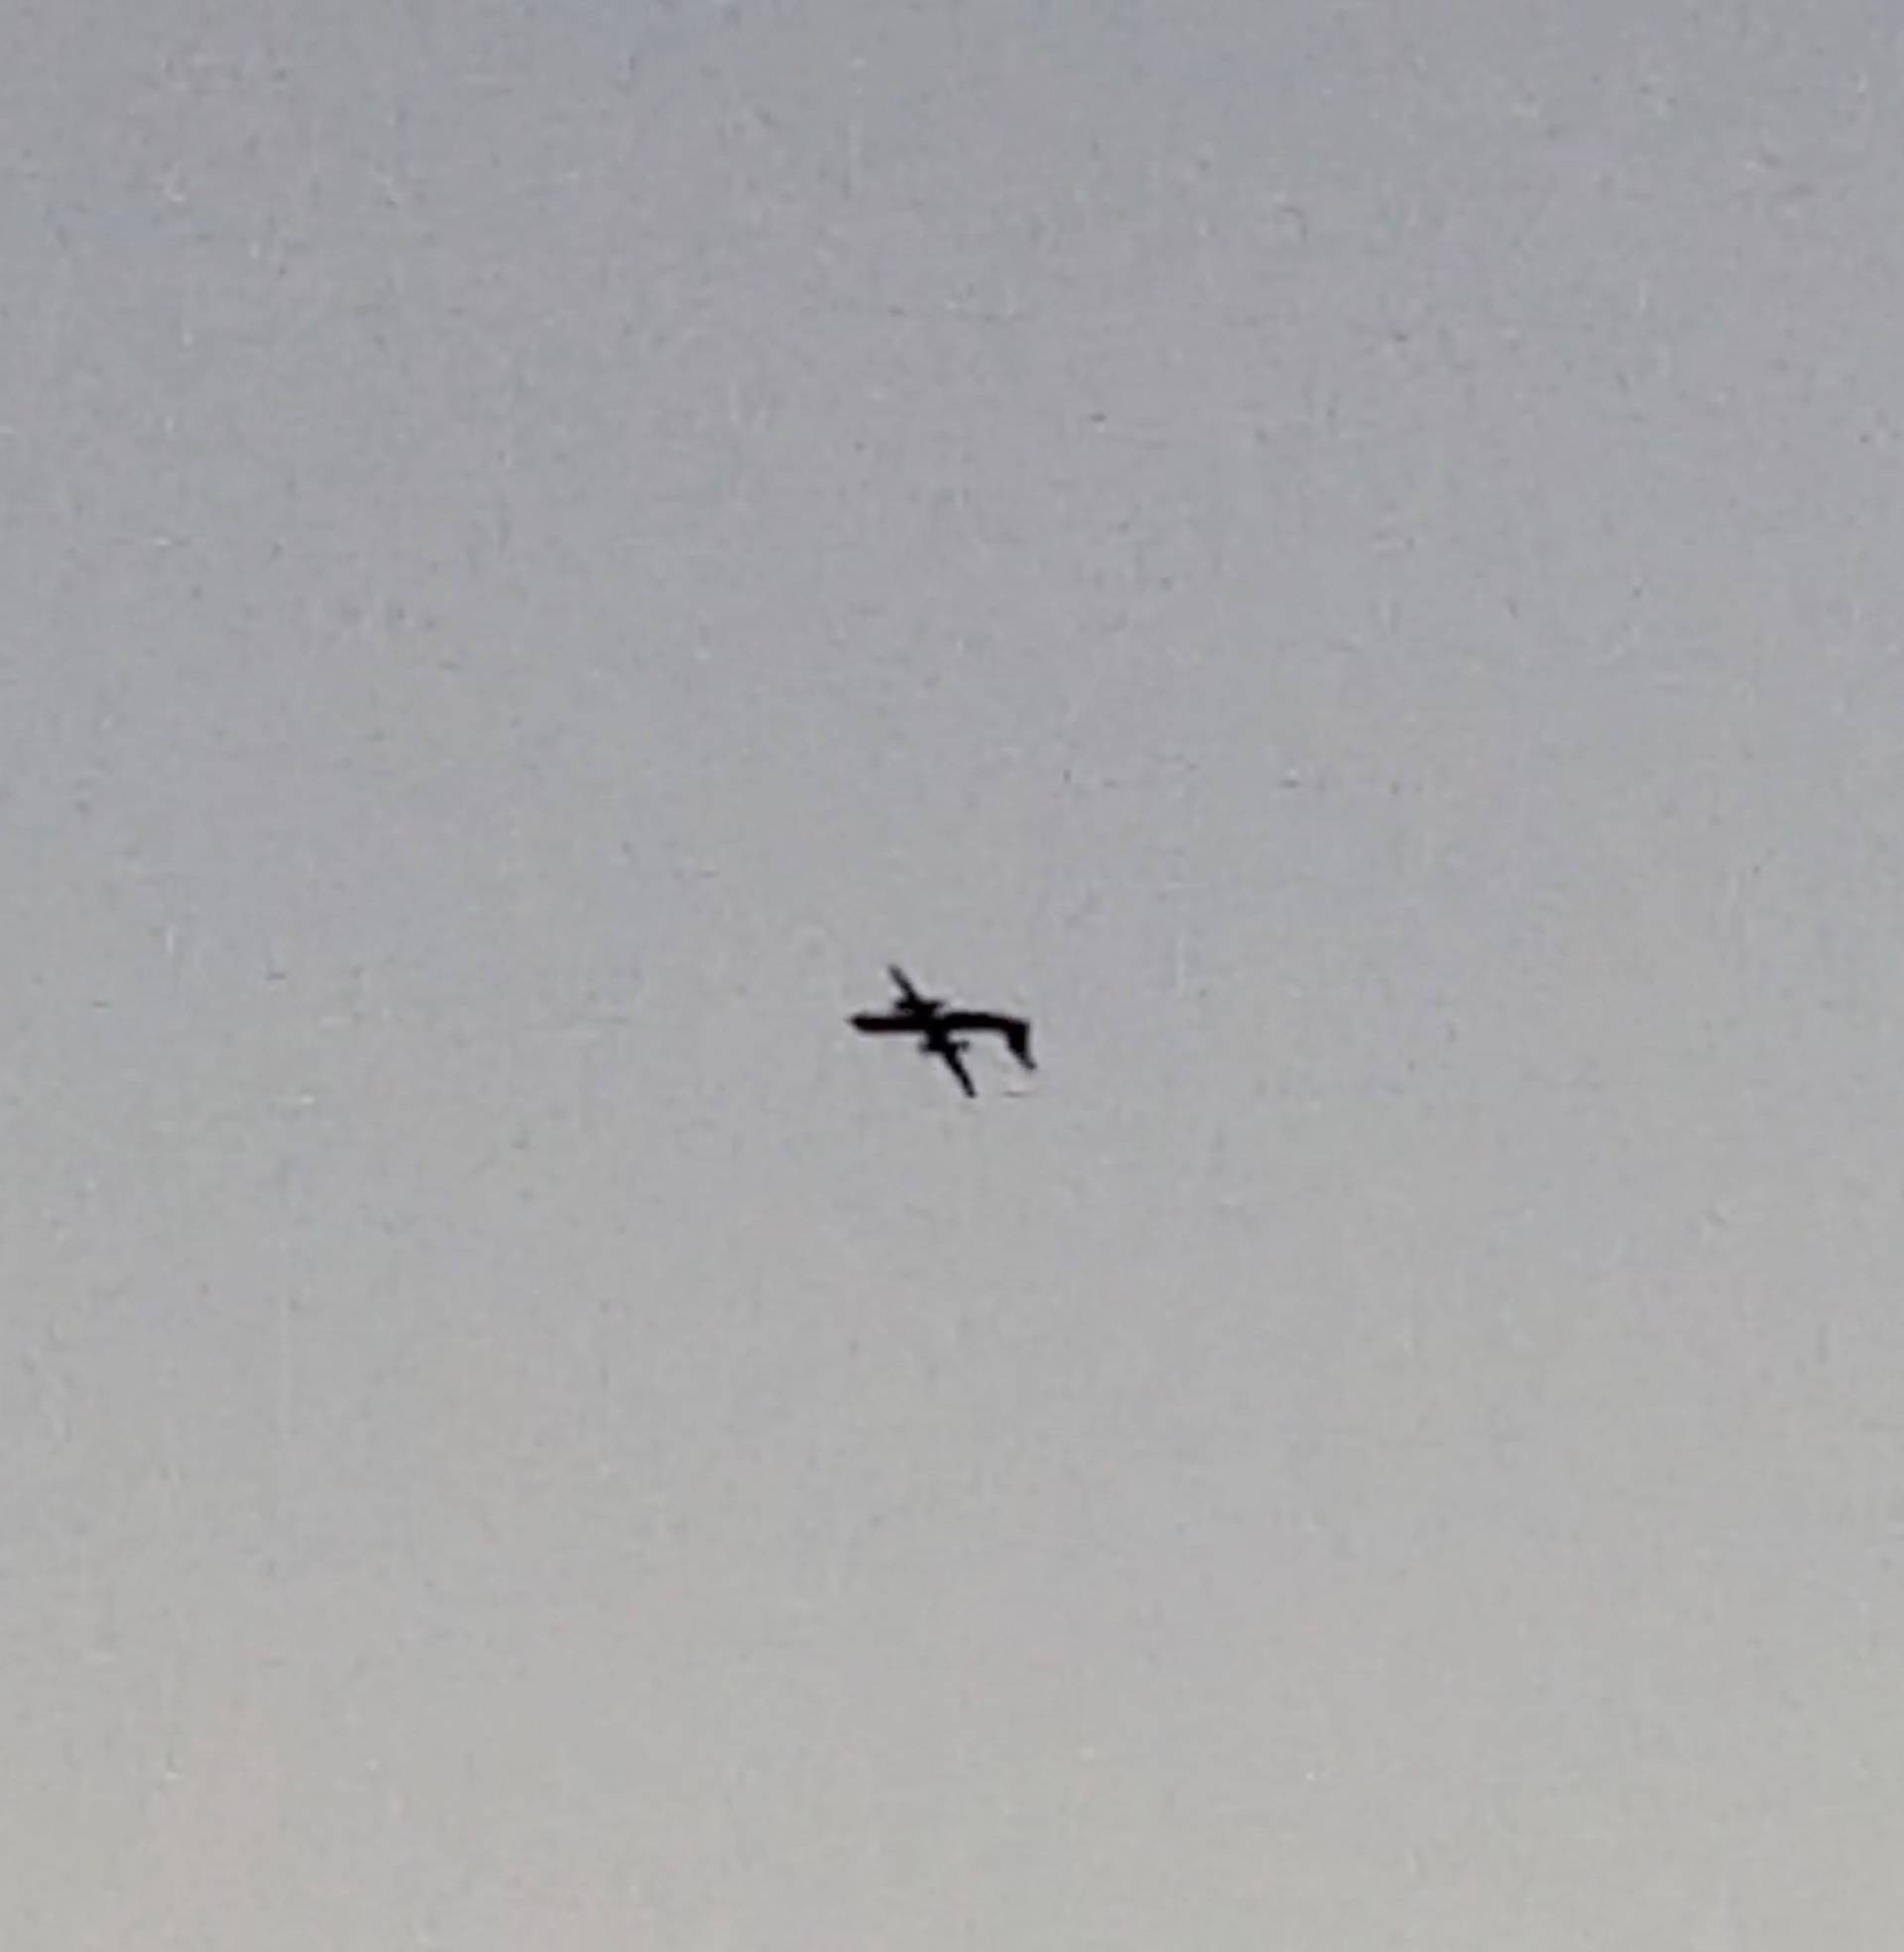 A Horizon Air Bombardier Dash 8 Q400, reported to be hijacked, flies upside down over University Place in this still image taken from a video obtained from social media